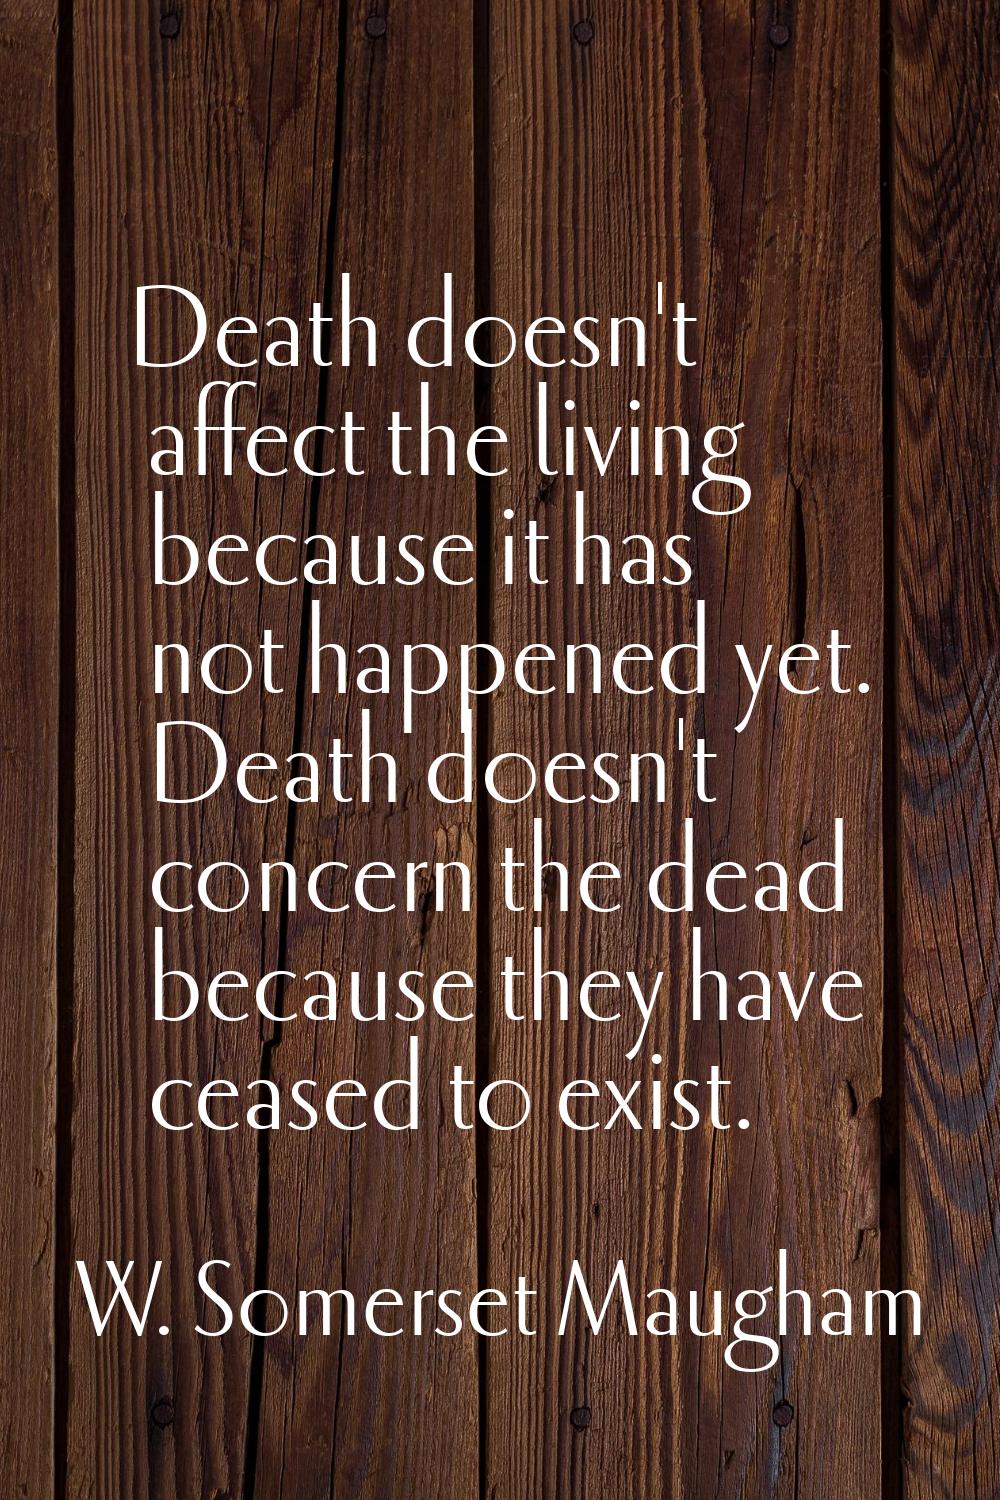 Death doesn't affect the living because it has not happened yet. Death doesn't concern the dead bec